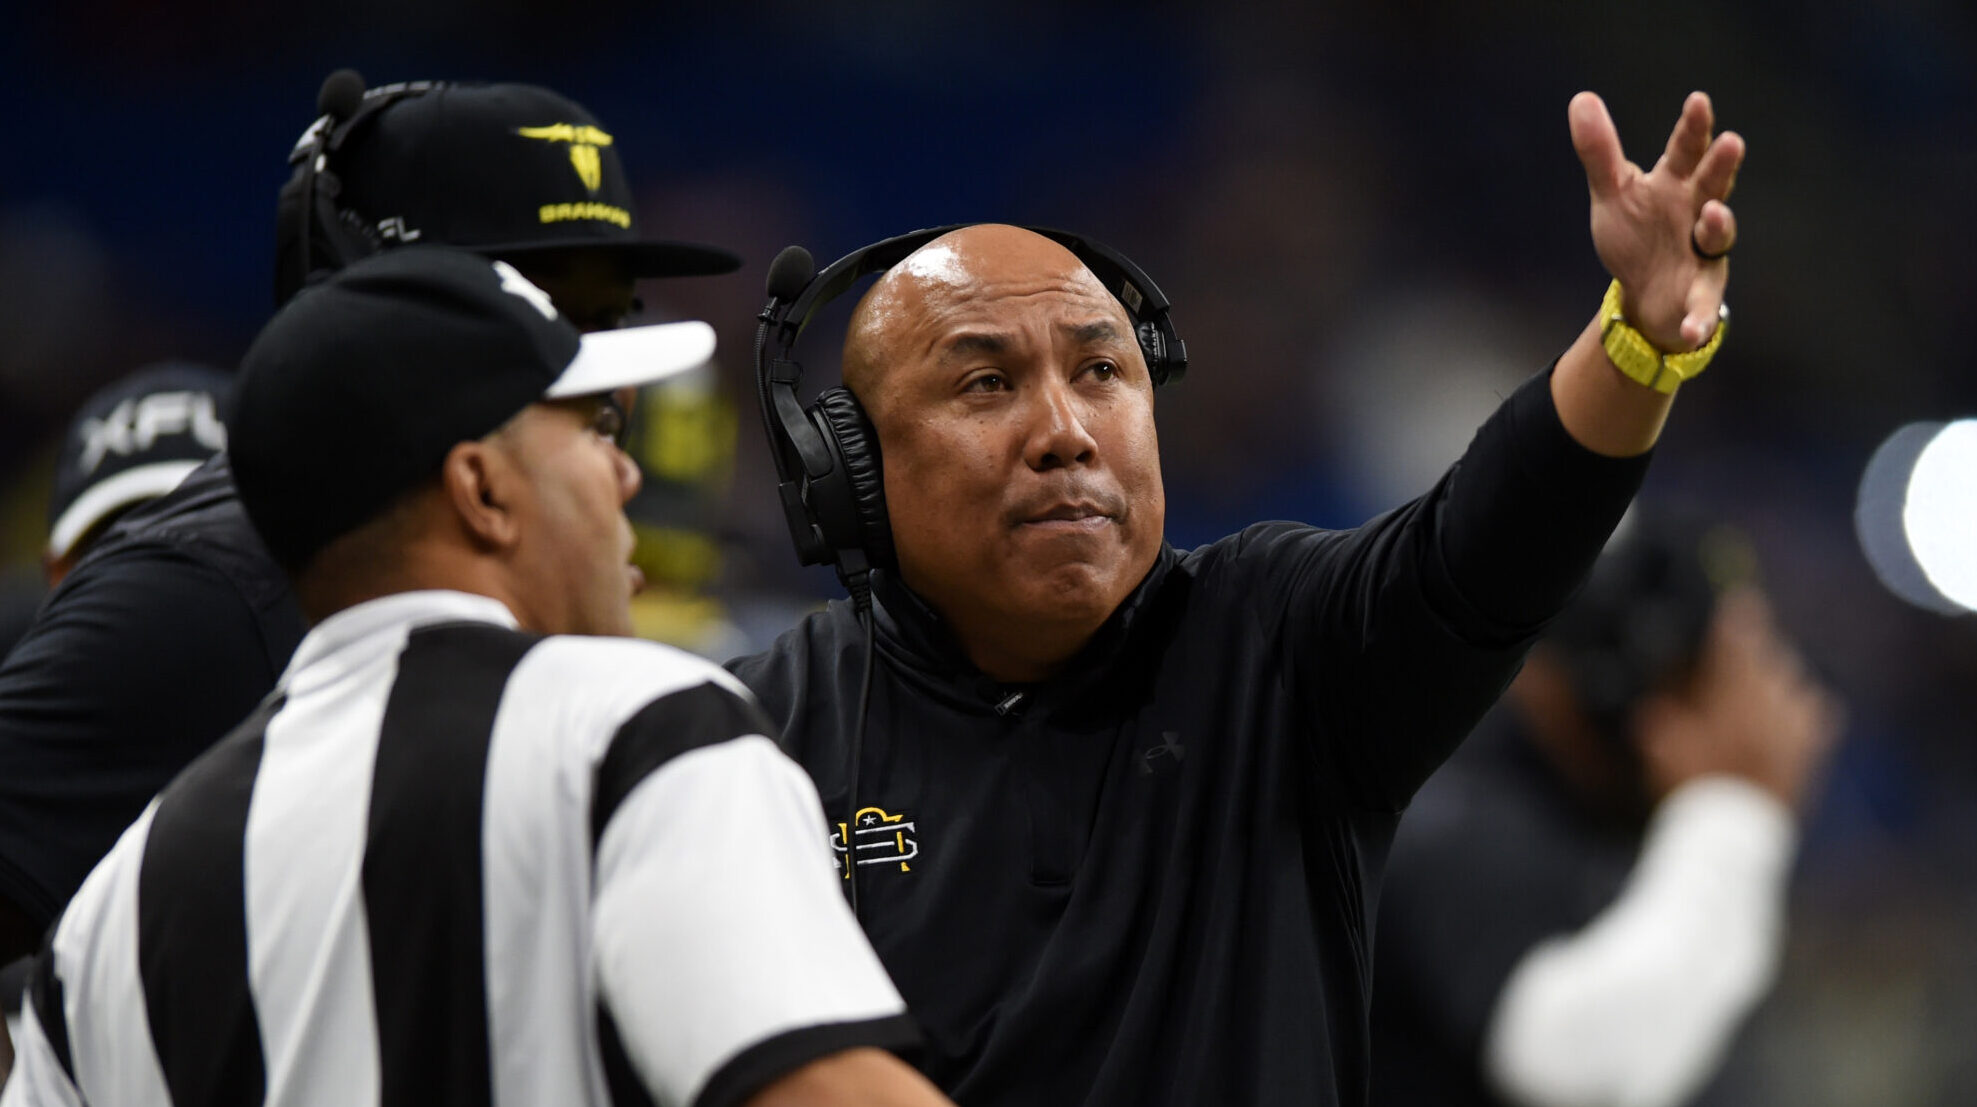 Hines Ward to become ASU's wide receivers coach